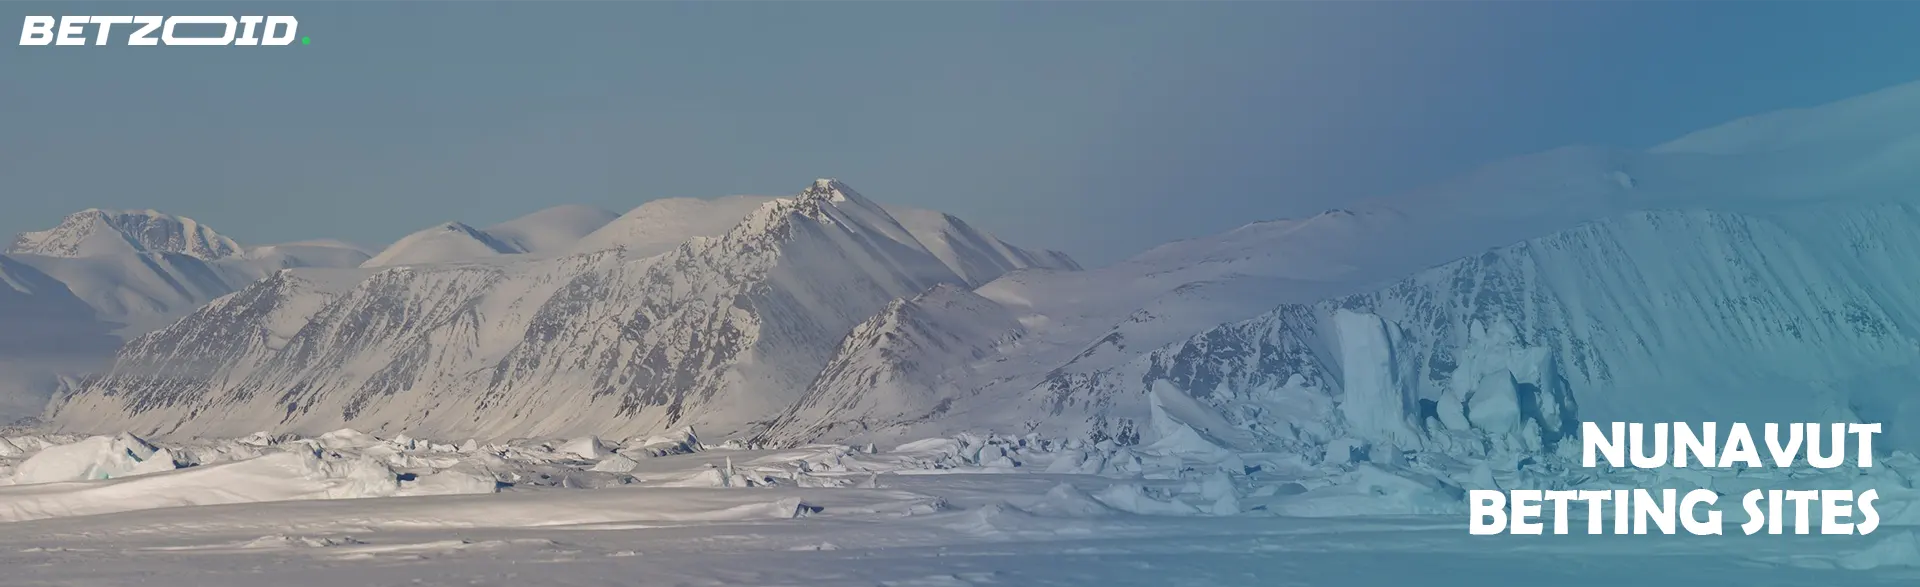 Scenic view of snow-covered mountains and icebergs in Nunavut, highlighting Nunavut betting sites.